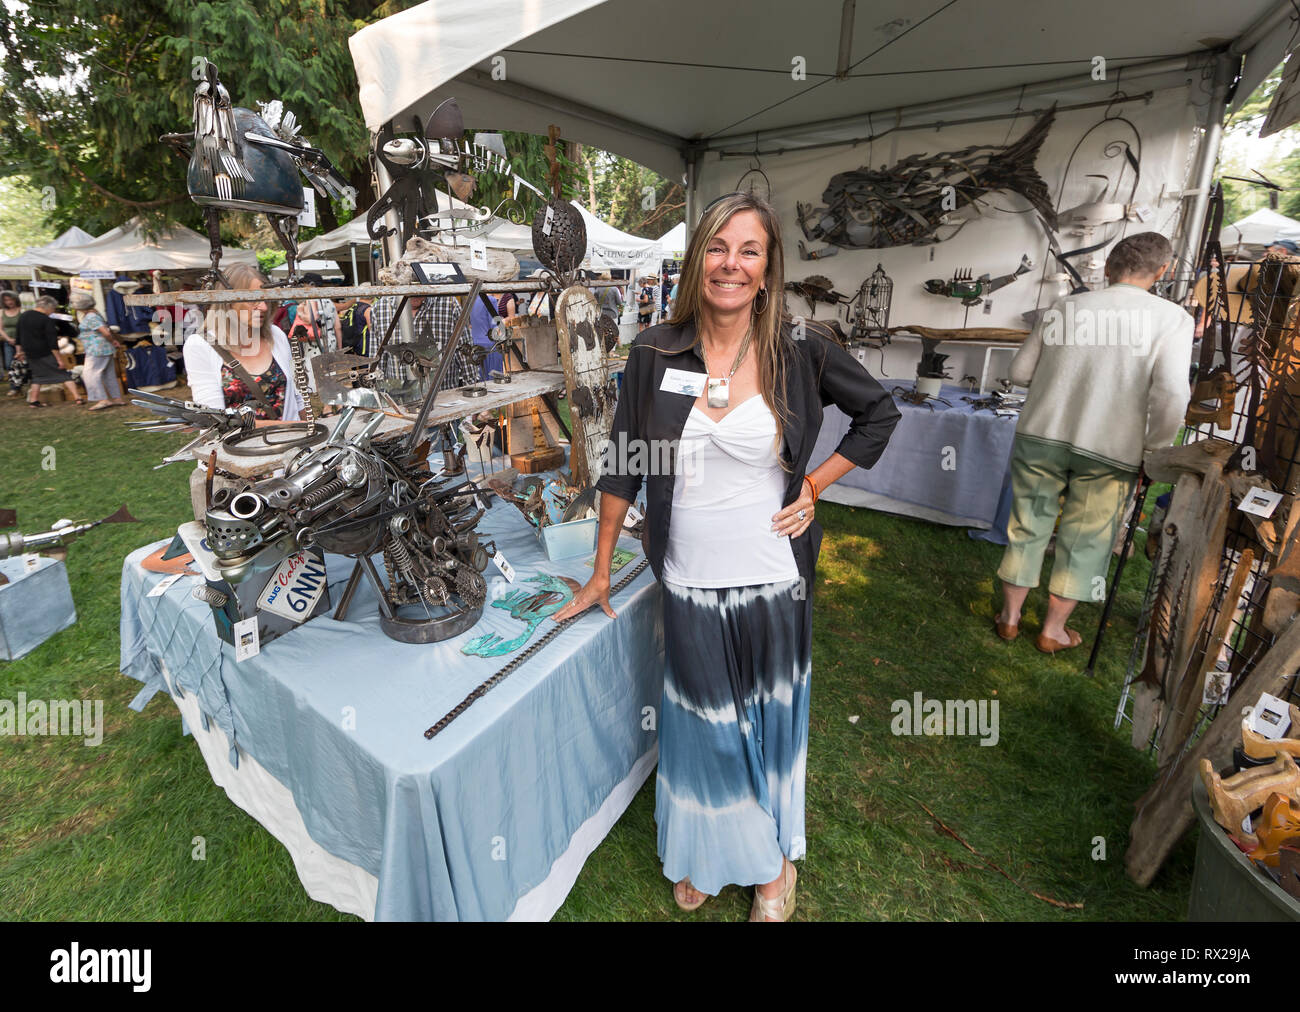 An attractive artisan displays her welding creations at the Filberg Festival, Comox, The Comox Valley, Vancouver Island, British Columbia, Canada Stock Photo